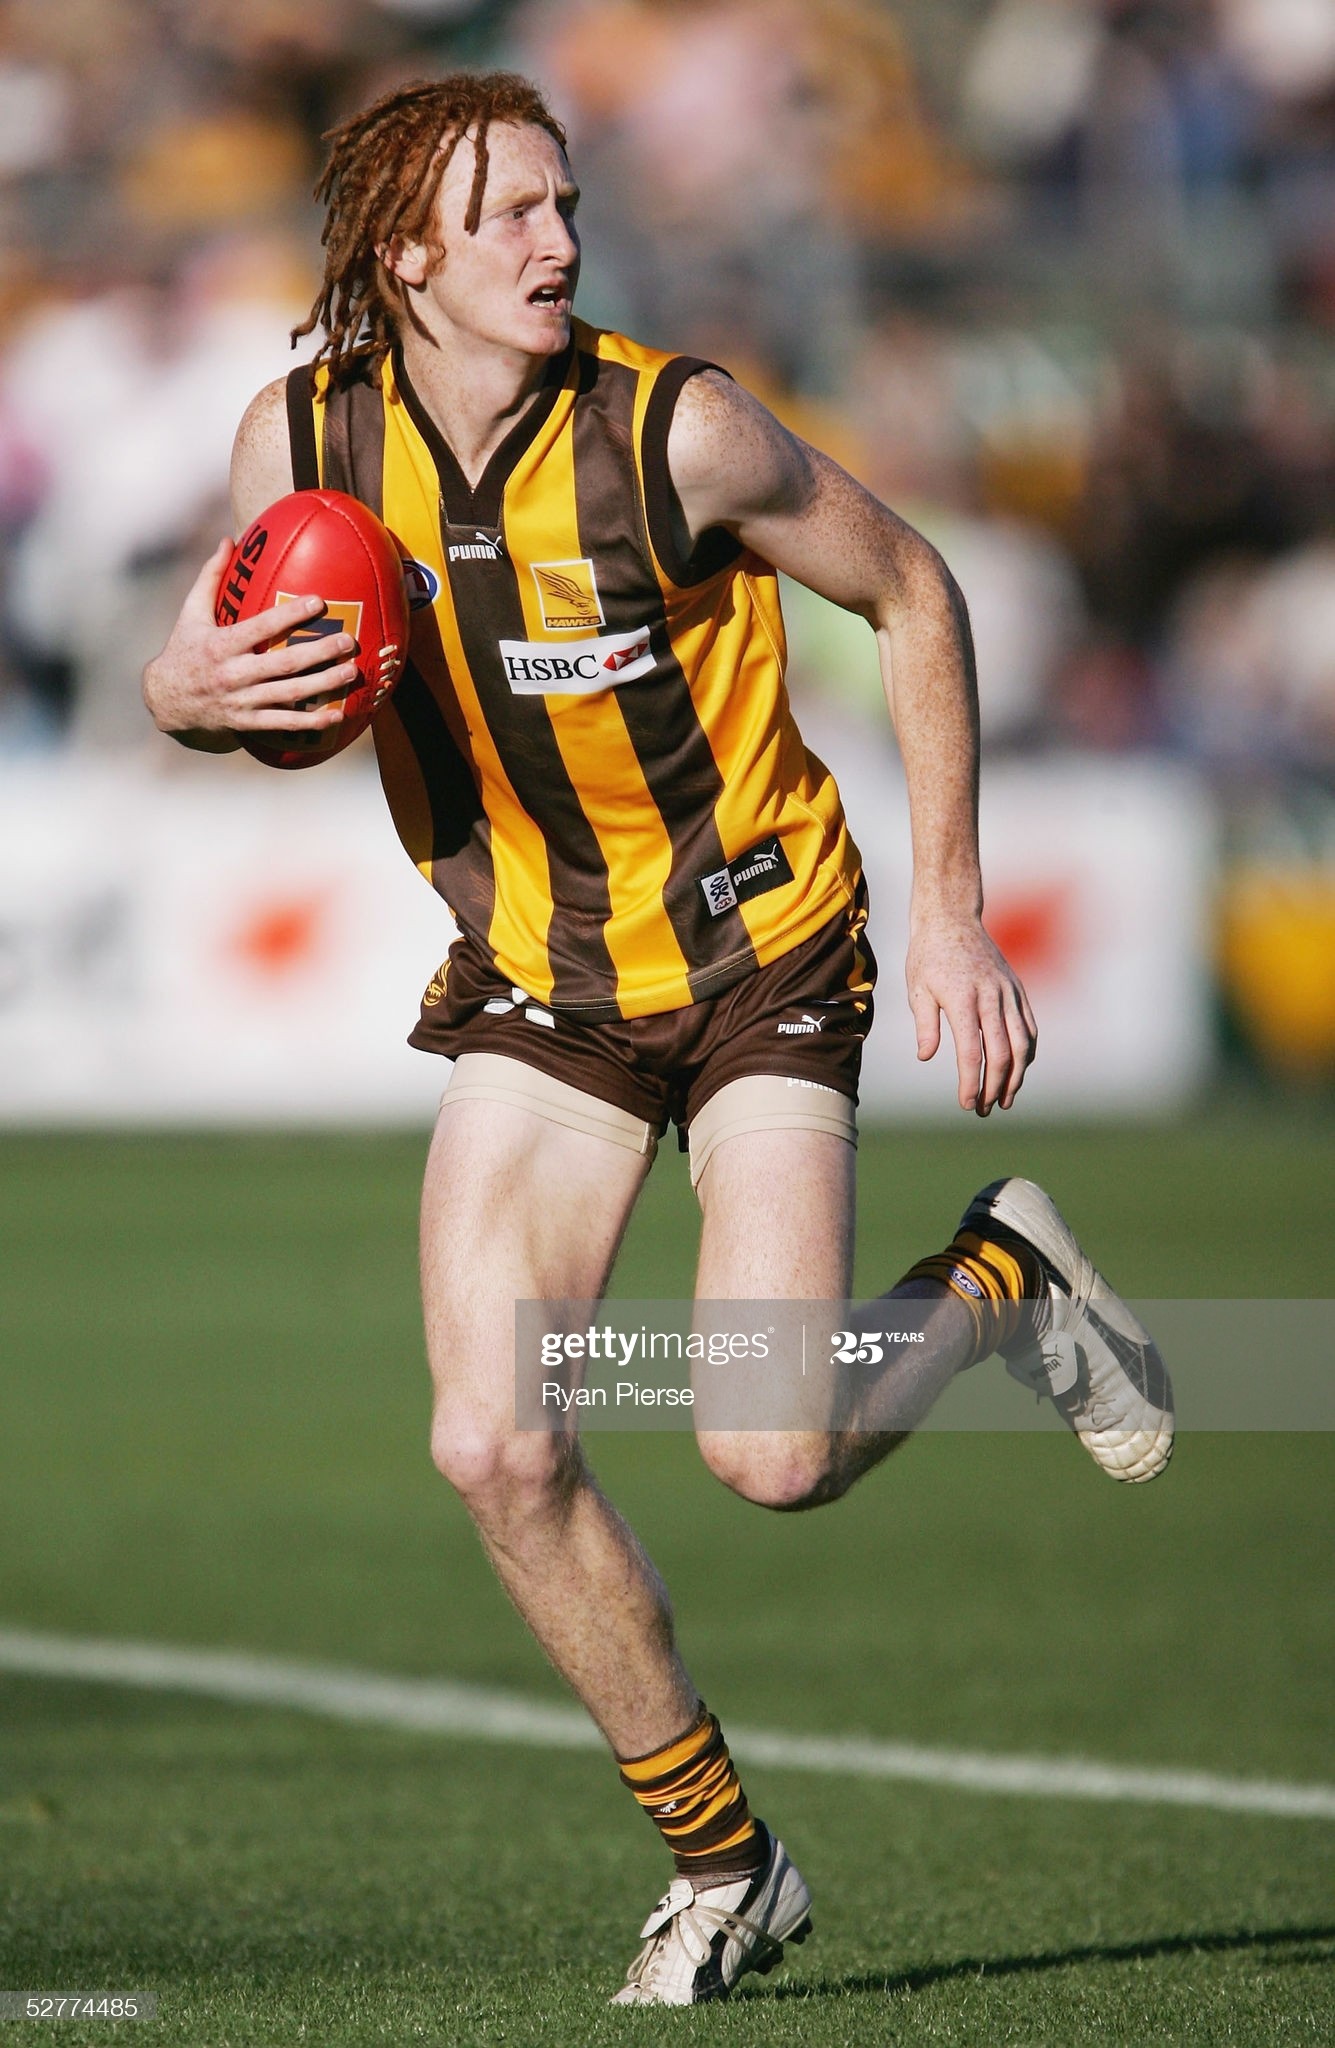 josh-thurgood-for-the-hawks-in-action-during-the-round-seven-afl-picture-id52774485